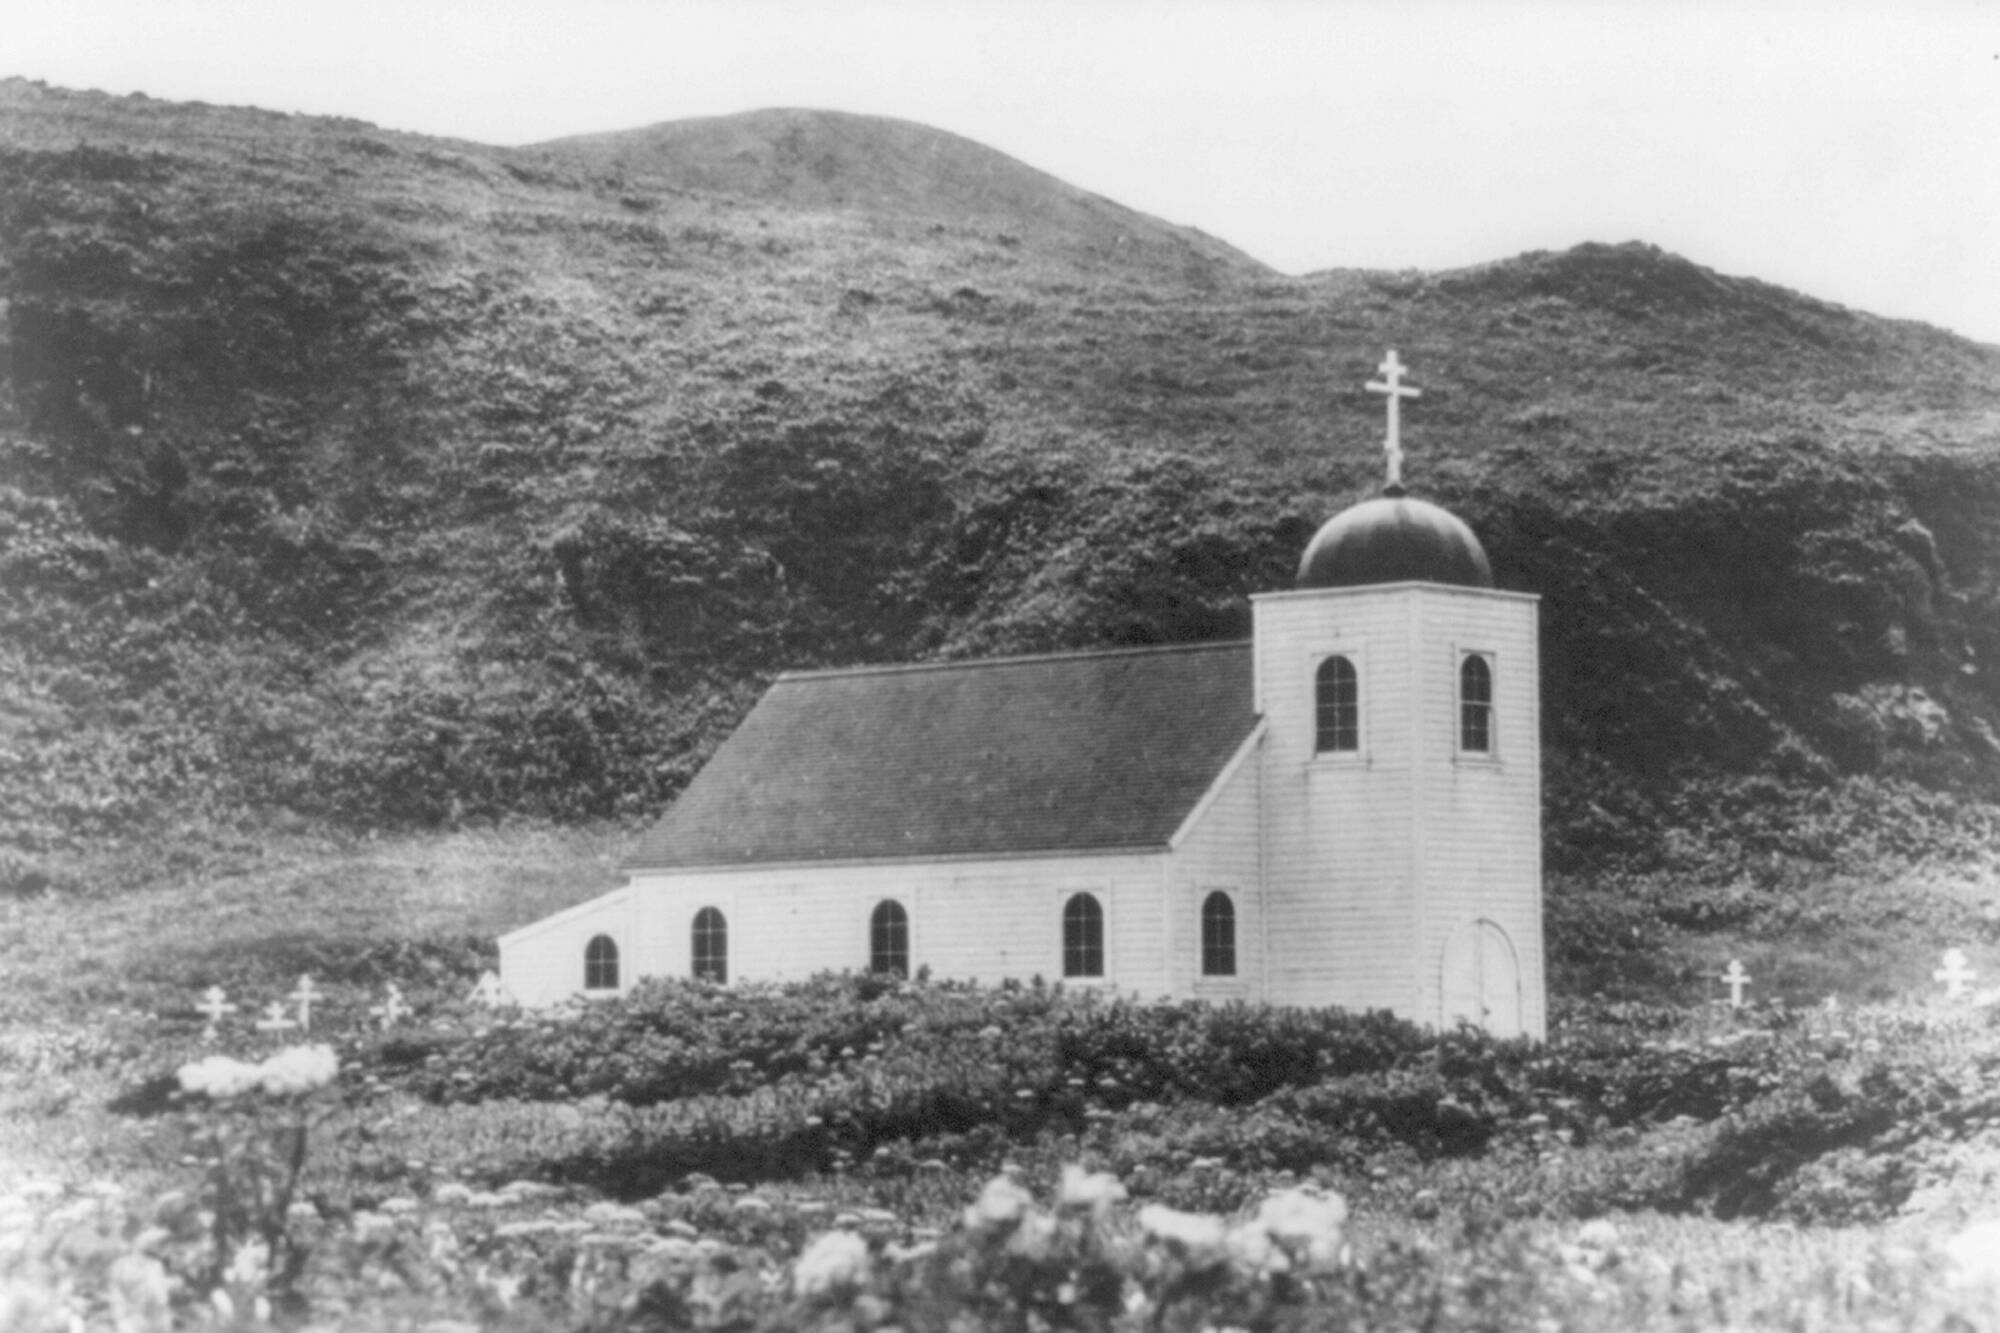 This photo provided by the Library of Congress shows the Russian Orthodox Church in Attu, Alaska, in 1938. Gregory Golodoff, who was 3 years old when his remote Alaska island was captured by Japanese troops and who became the last survivor among its 41 residents sent to Japan as prisoners, died Nov. 17, 2023. The island of Attu in the Aleutian chain was one of just a few U.S. territories taken by enemy forces during the war, and the American effort to reclaim it amid frigid rain, dense fog and hurricane-force winds was the only battle of the war fought on North American soil. (Courtesy of Library of Congress via AP)